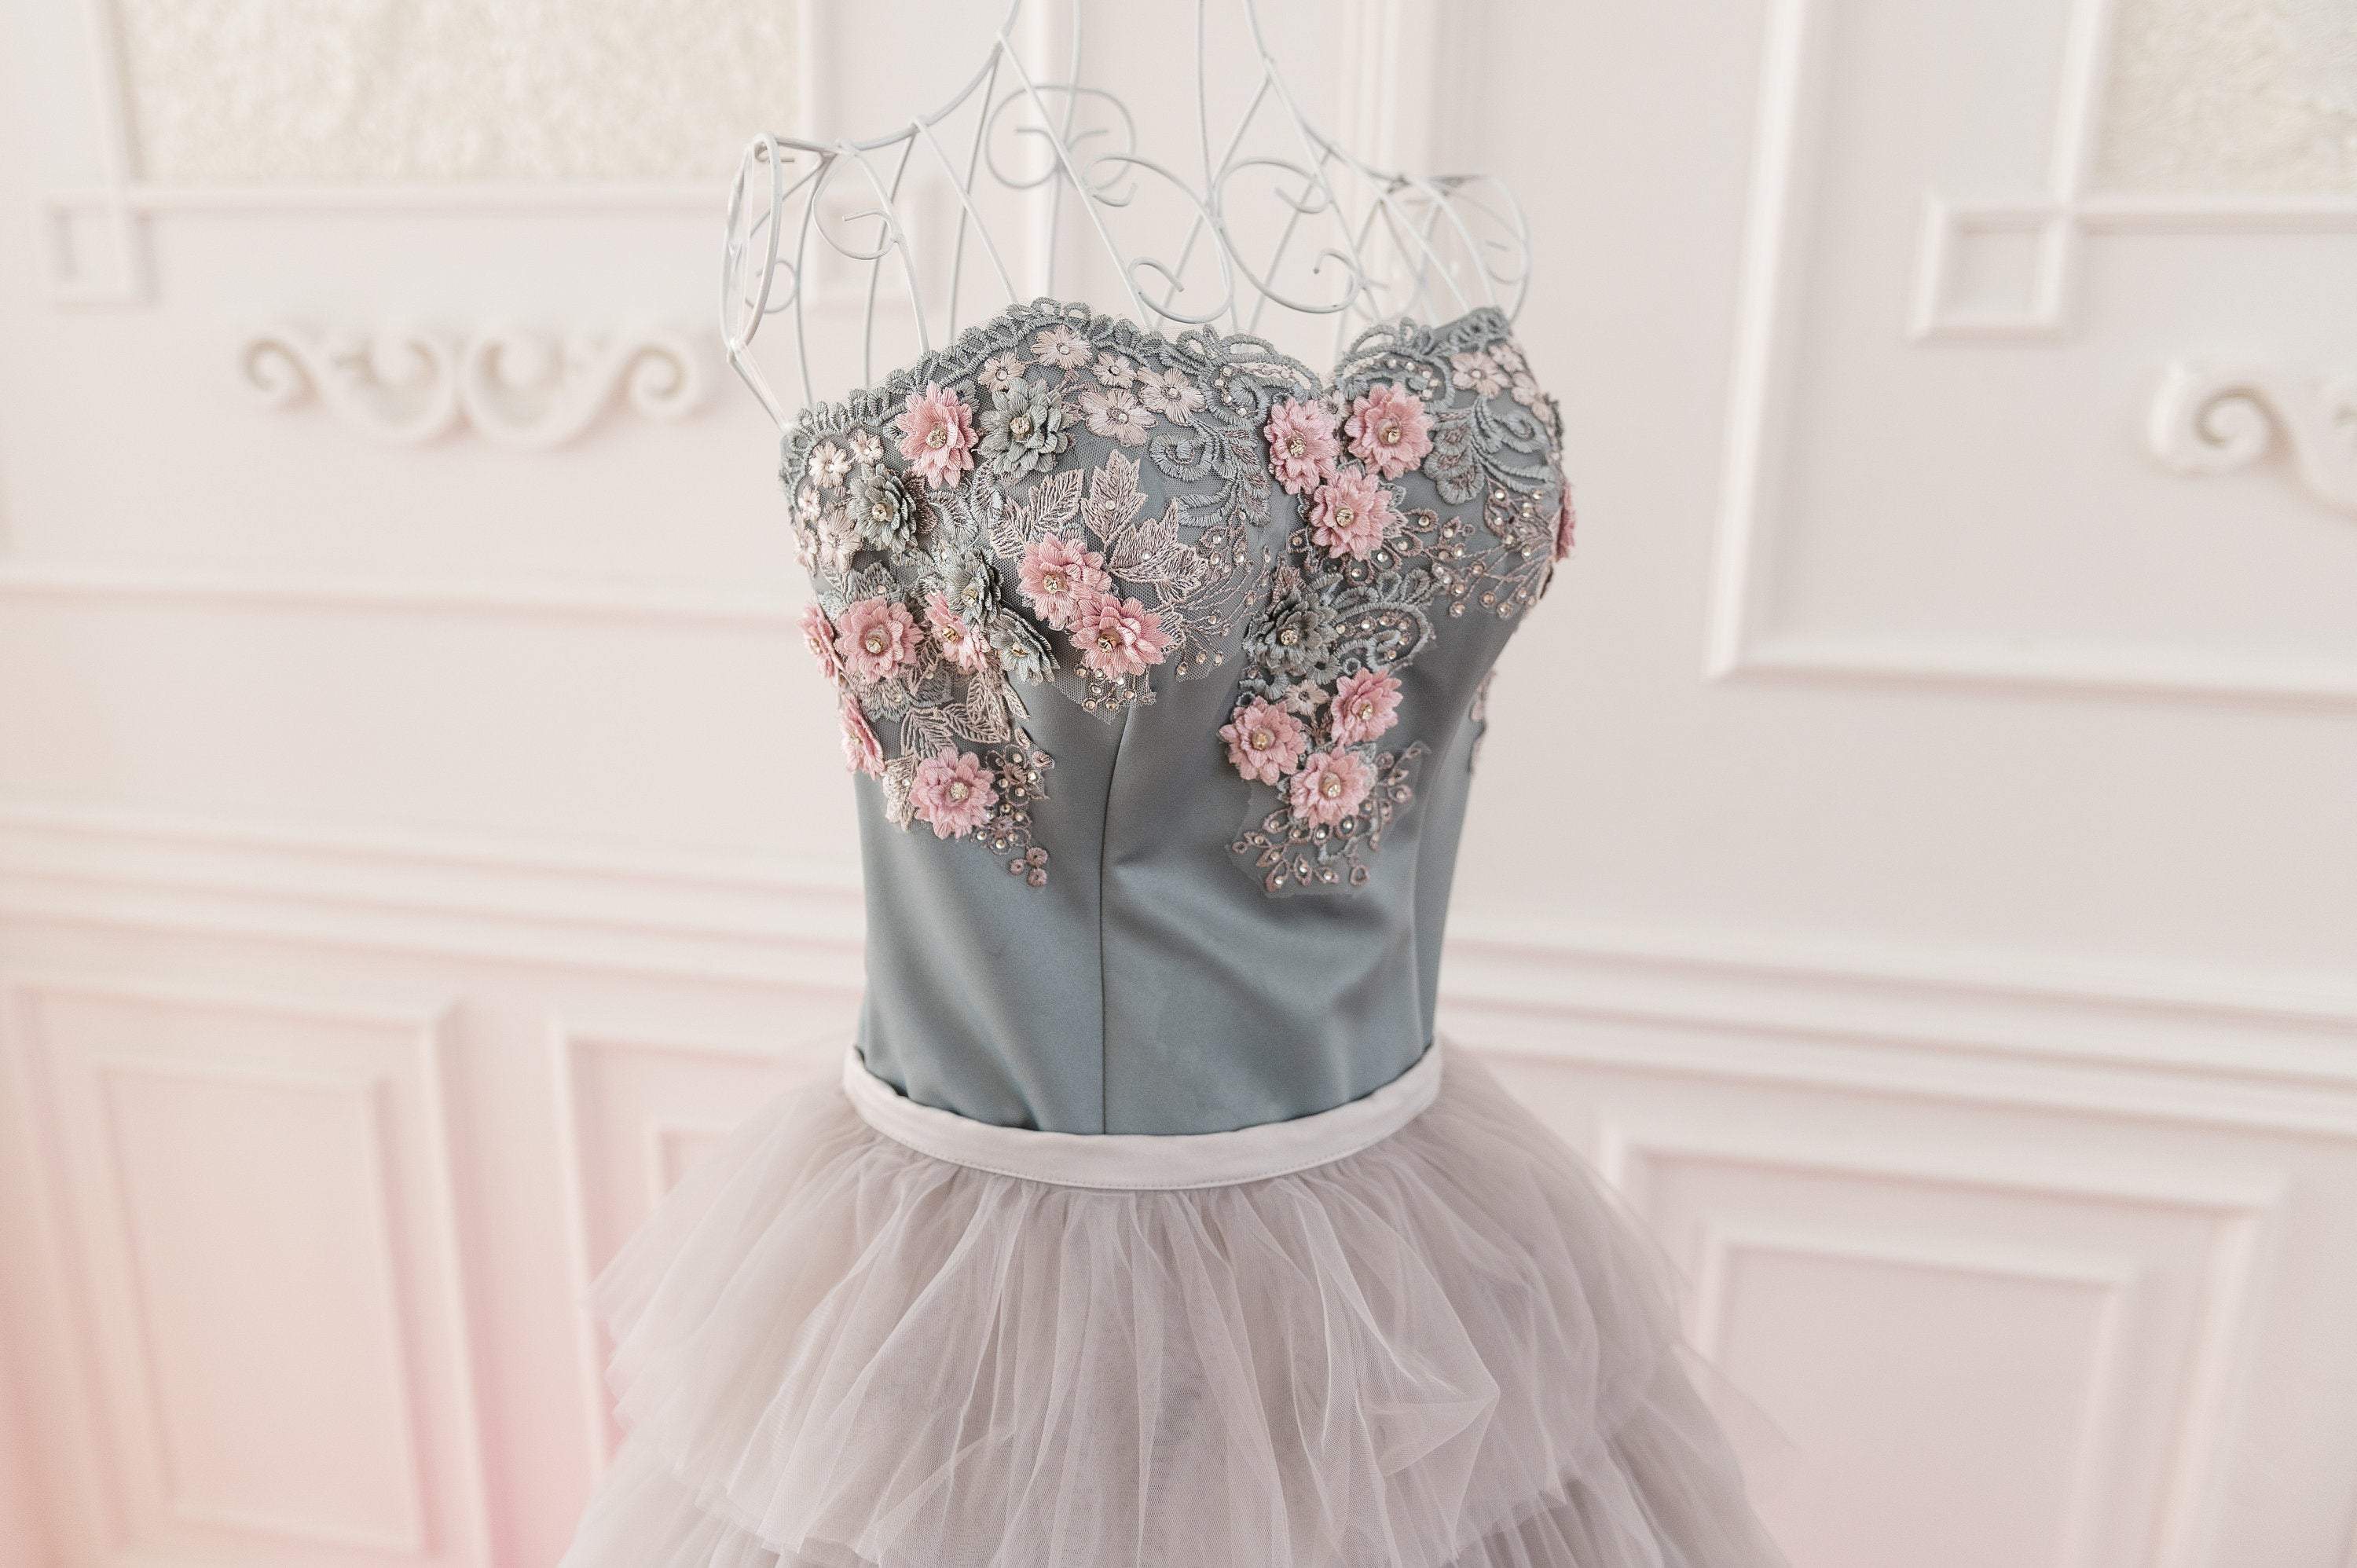 Matchinglook Grey and Pink Wedding Dress, Couture Tulle Photoshoot Dress, Tiered Tulle Gown, Ombre Tulle Dress, Tiered Wedding Dress, Bridal Separates S